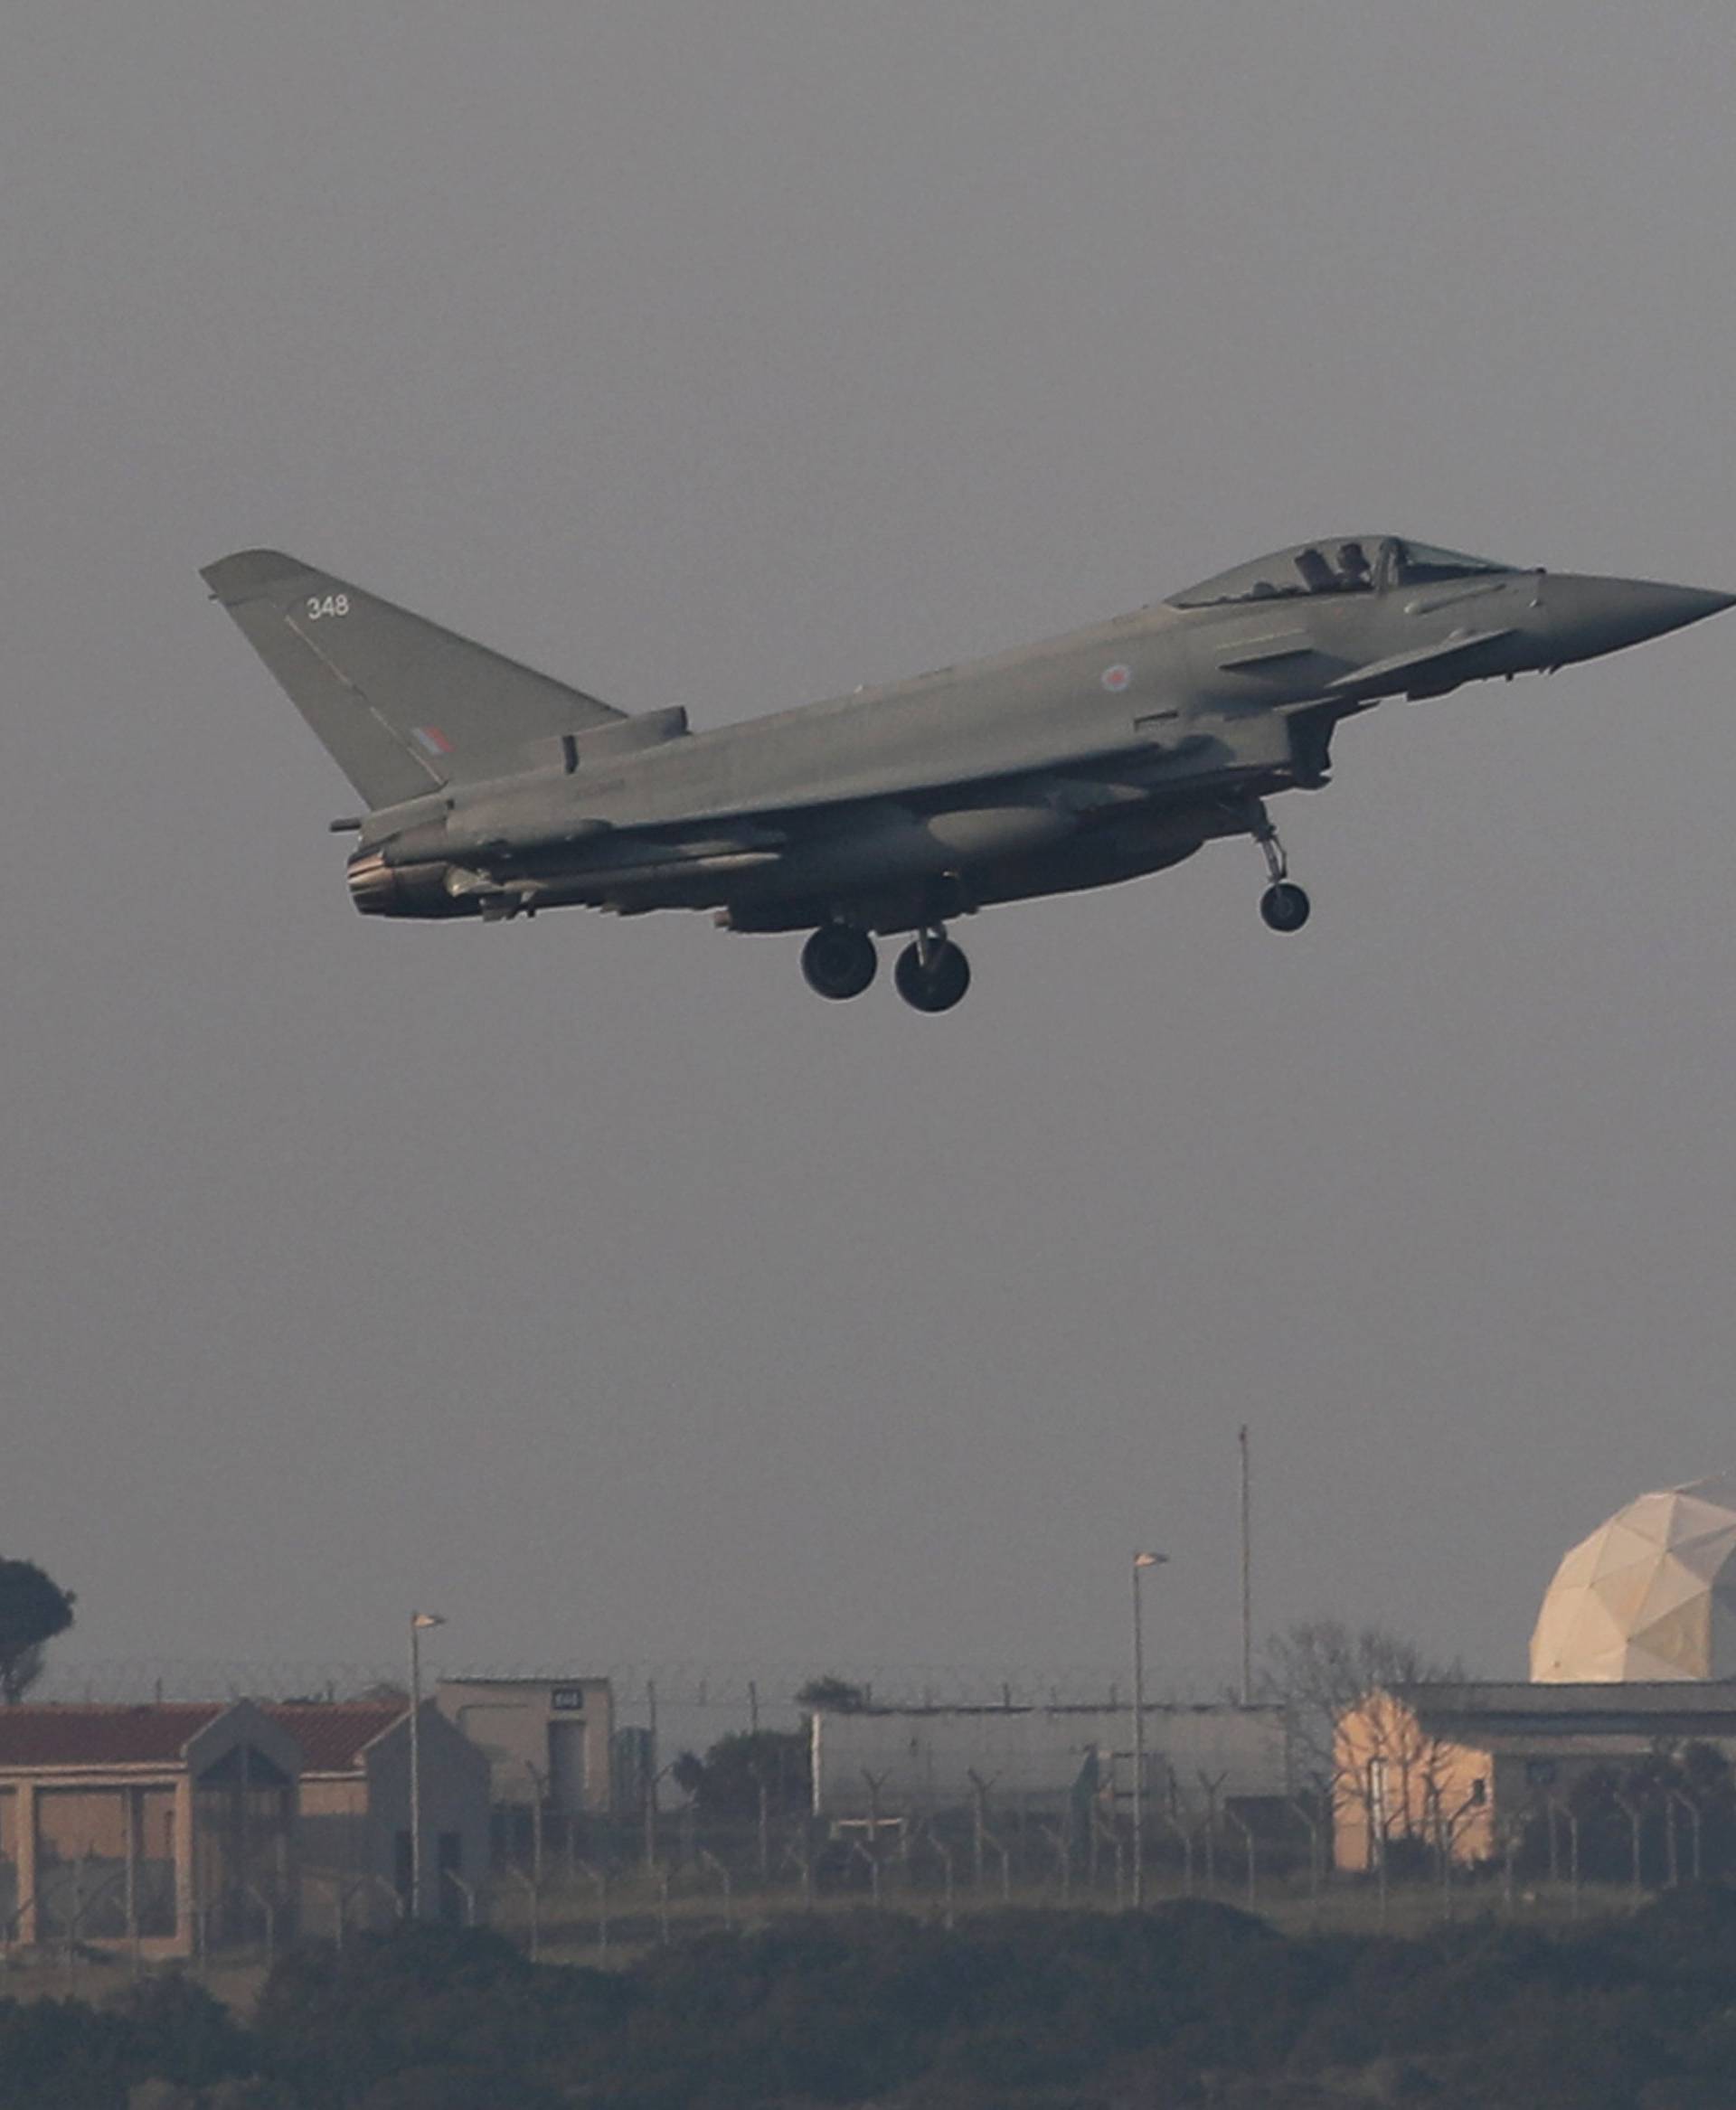 A French fighter jet prepares to land at RAF Akrotiri, a military base Britain maintains on Cyprus